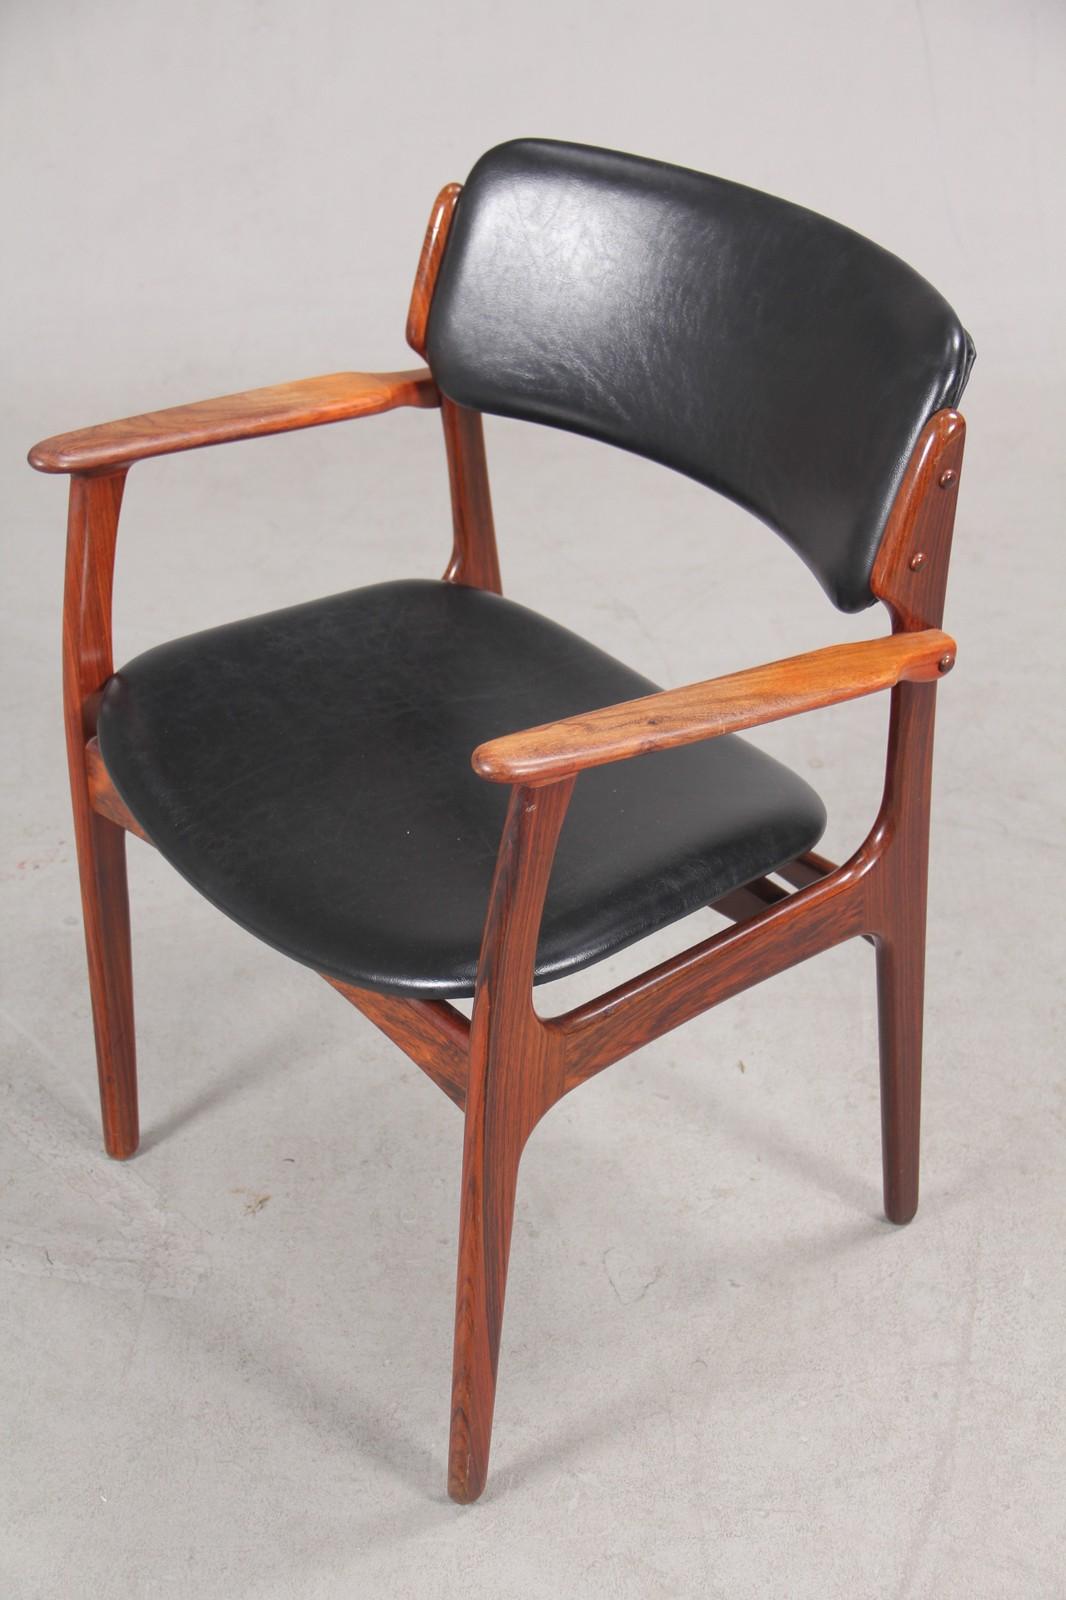 Erik Buch fully restored armchairs in rosewood with excellent woodwork that are evidence of Good Design and craftsmanship.

The chairs feature a solid rosewood construction with Erik Buch's characteristic floating seat and backrest that ensures a